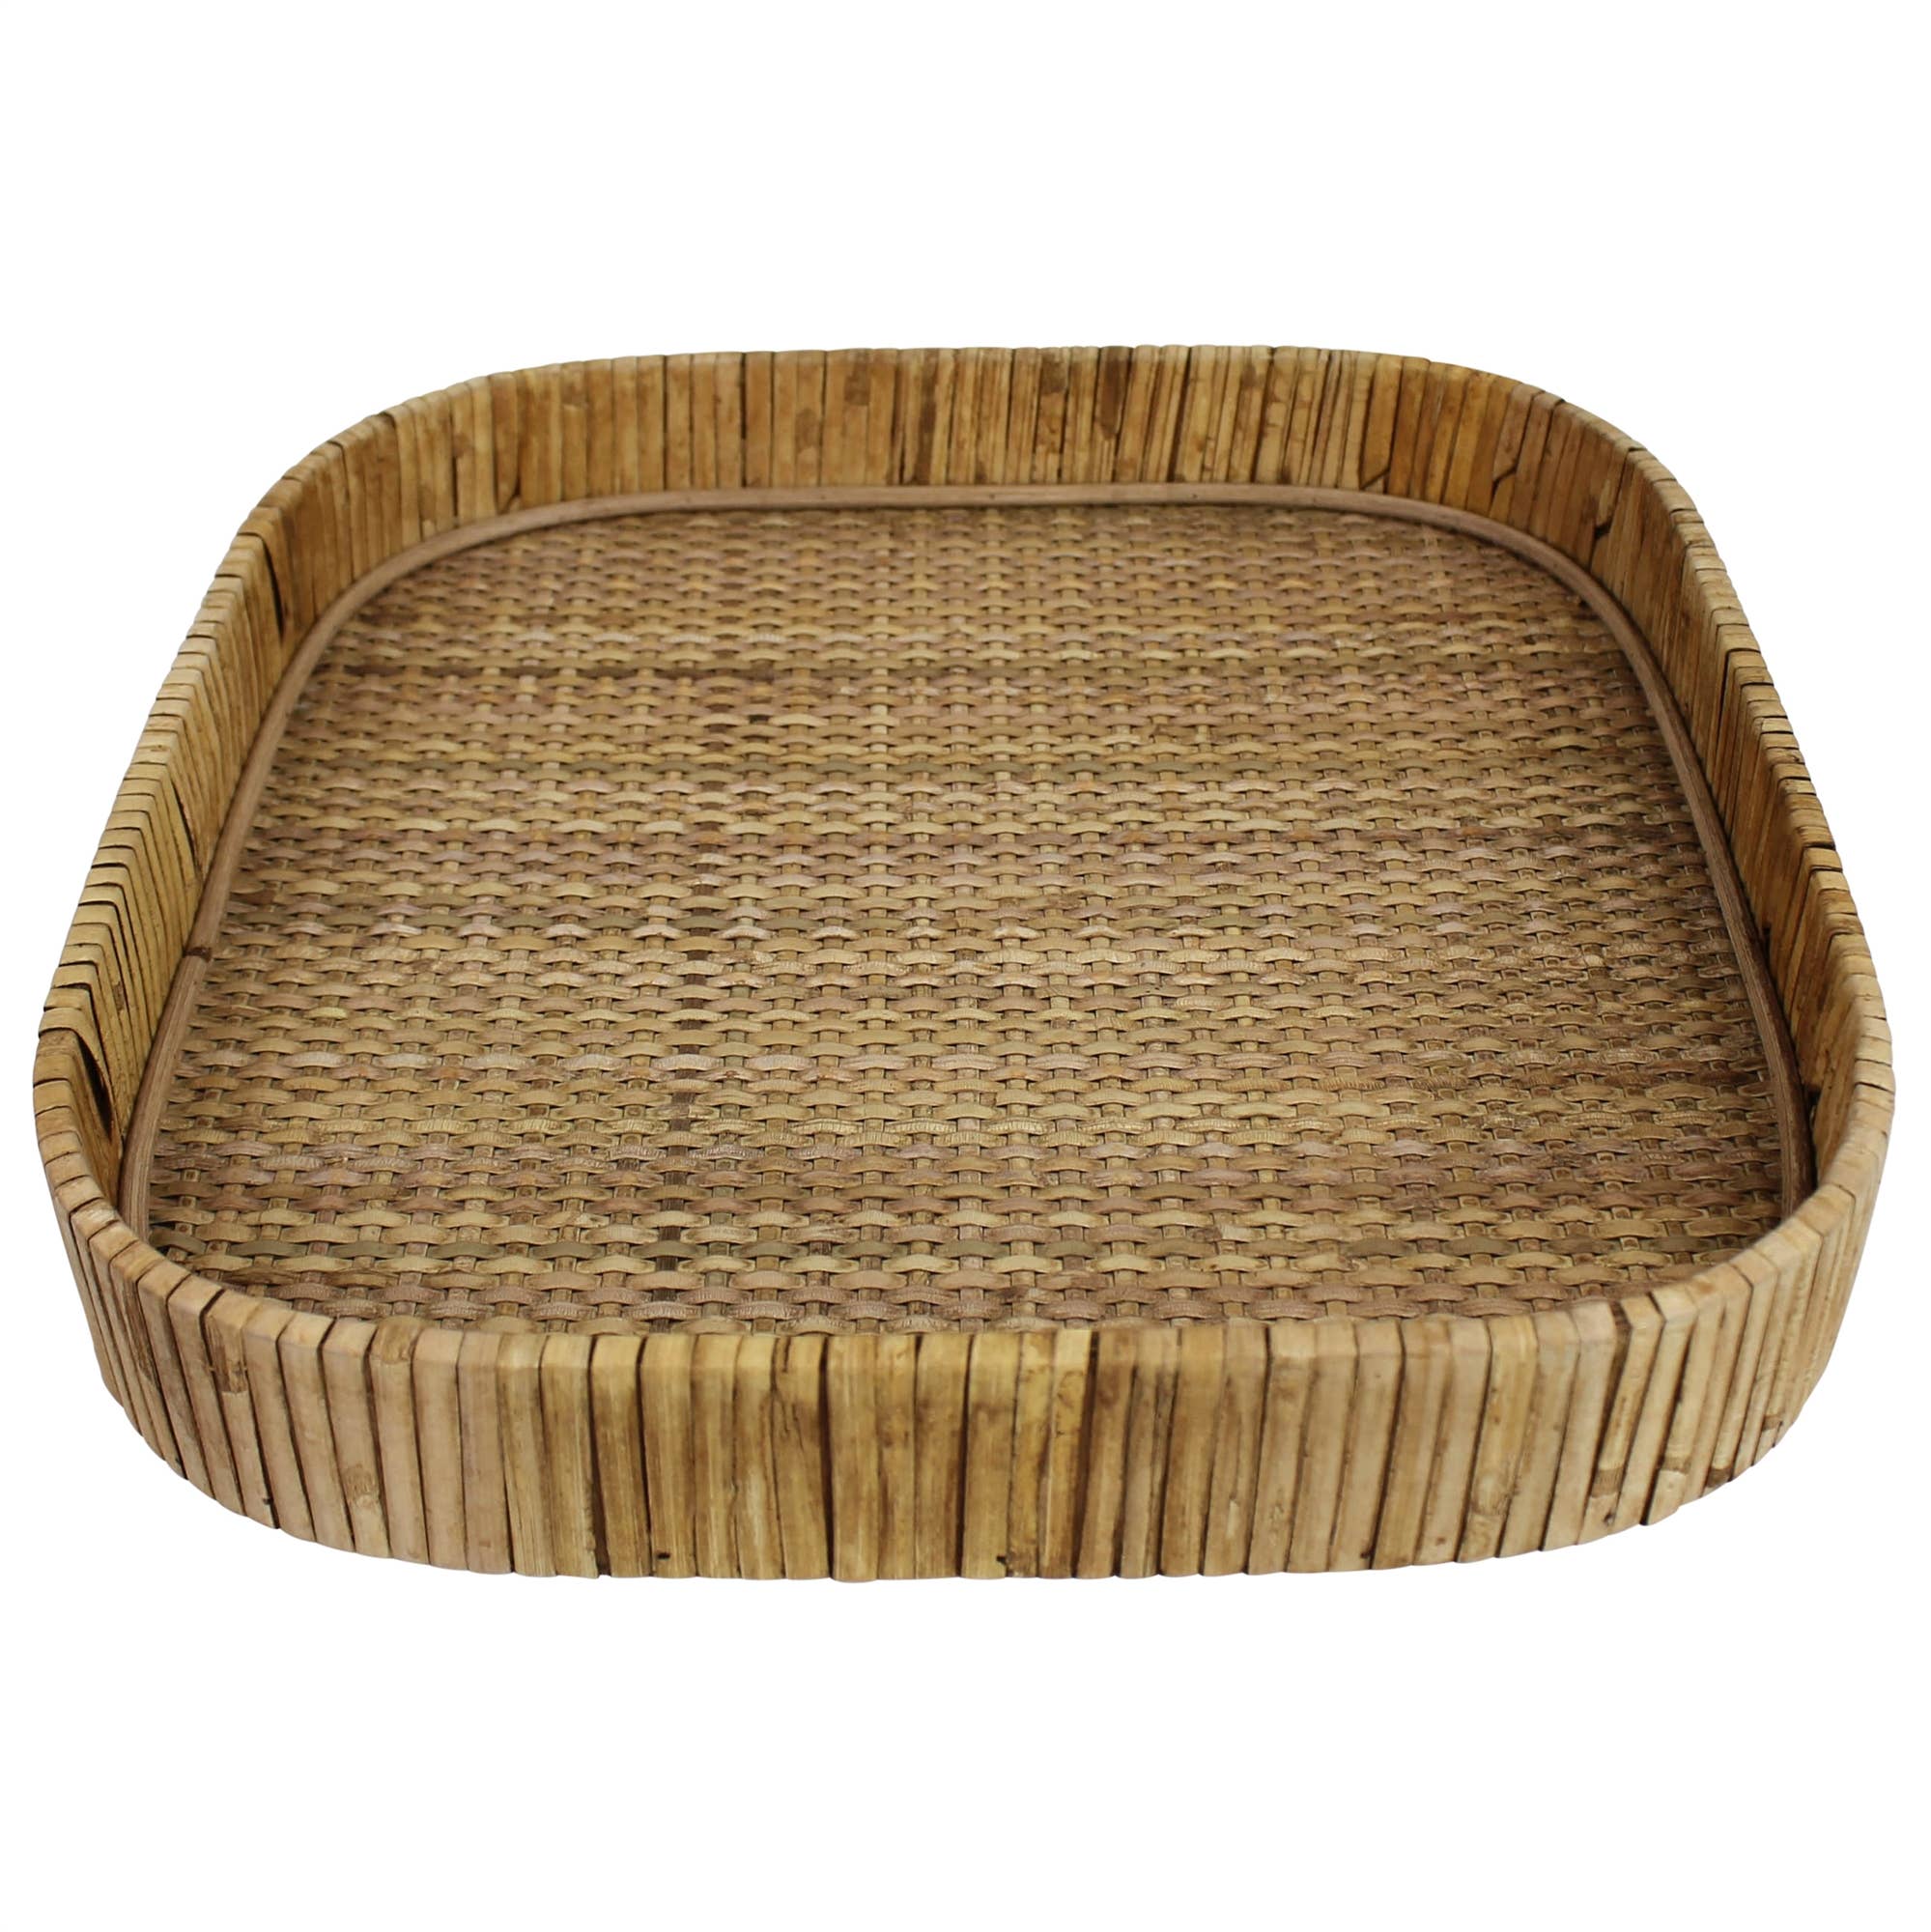 Cayman Tray, Rattan, Square - Large